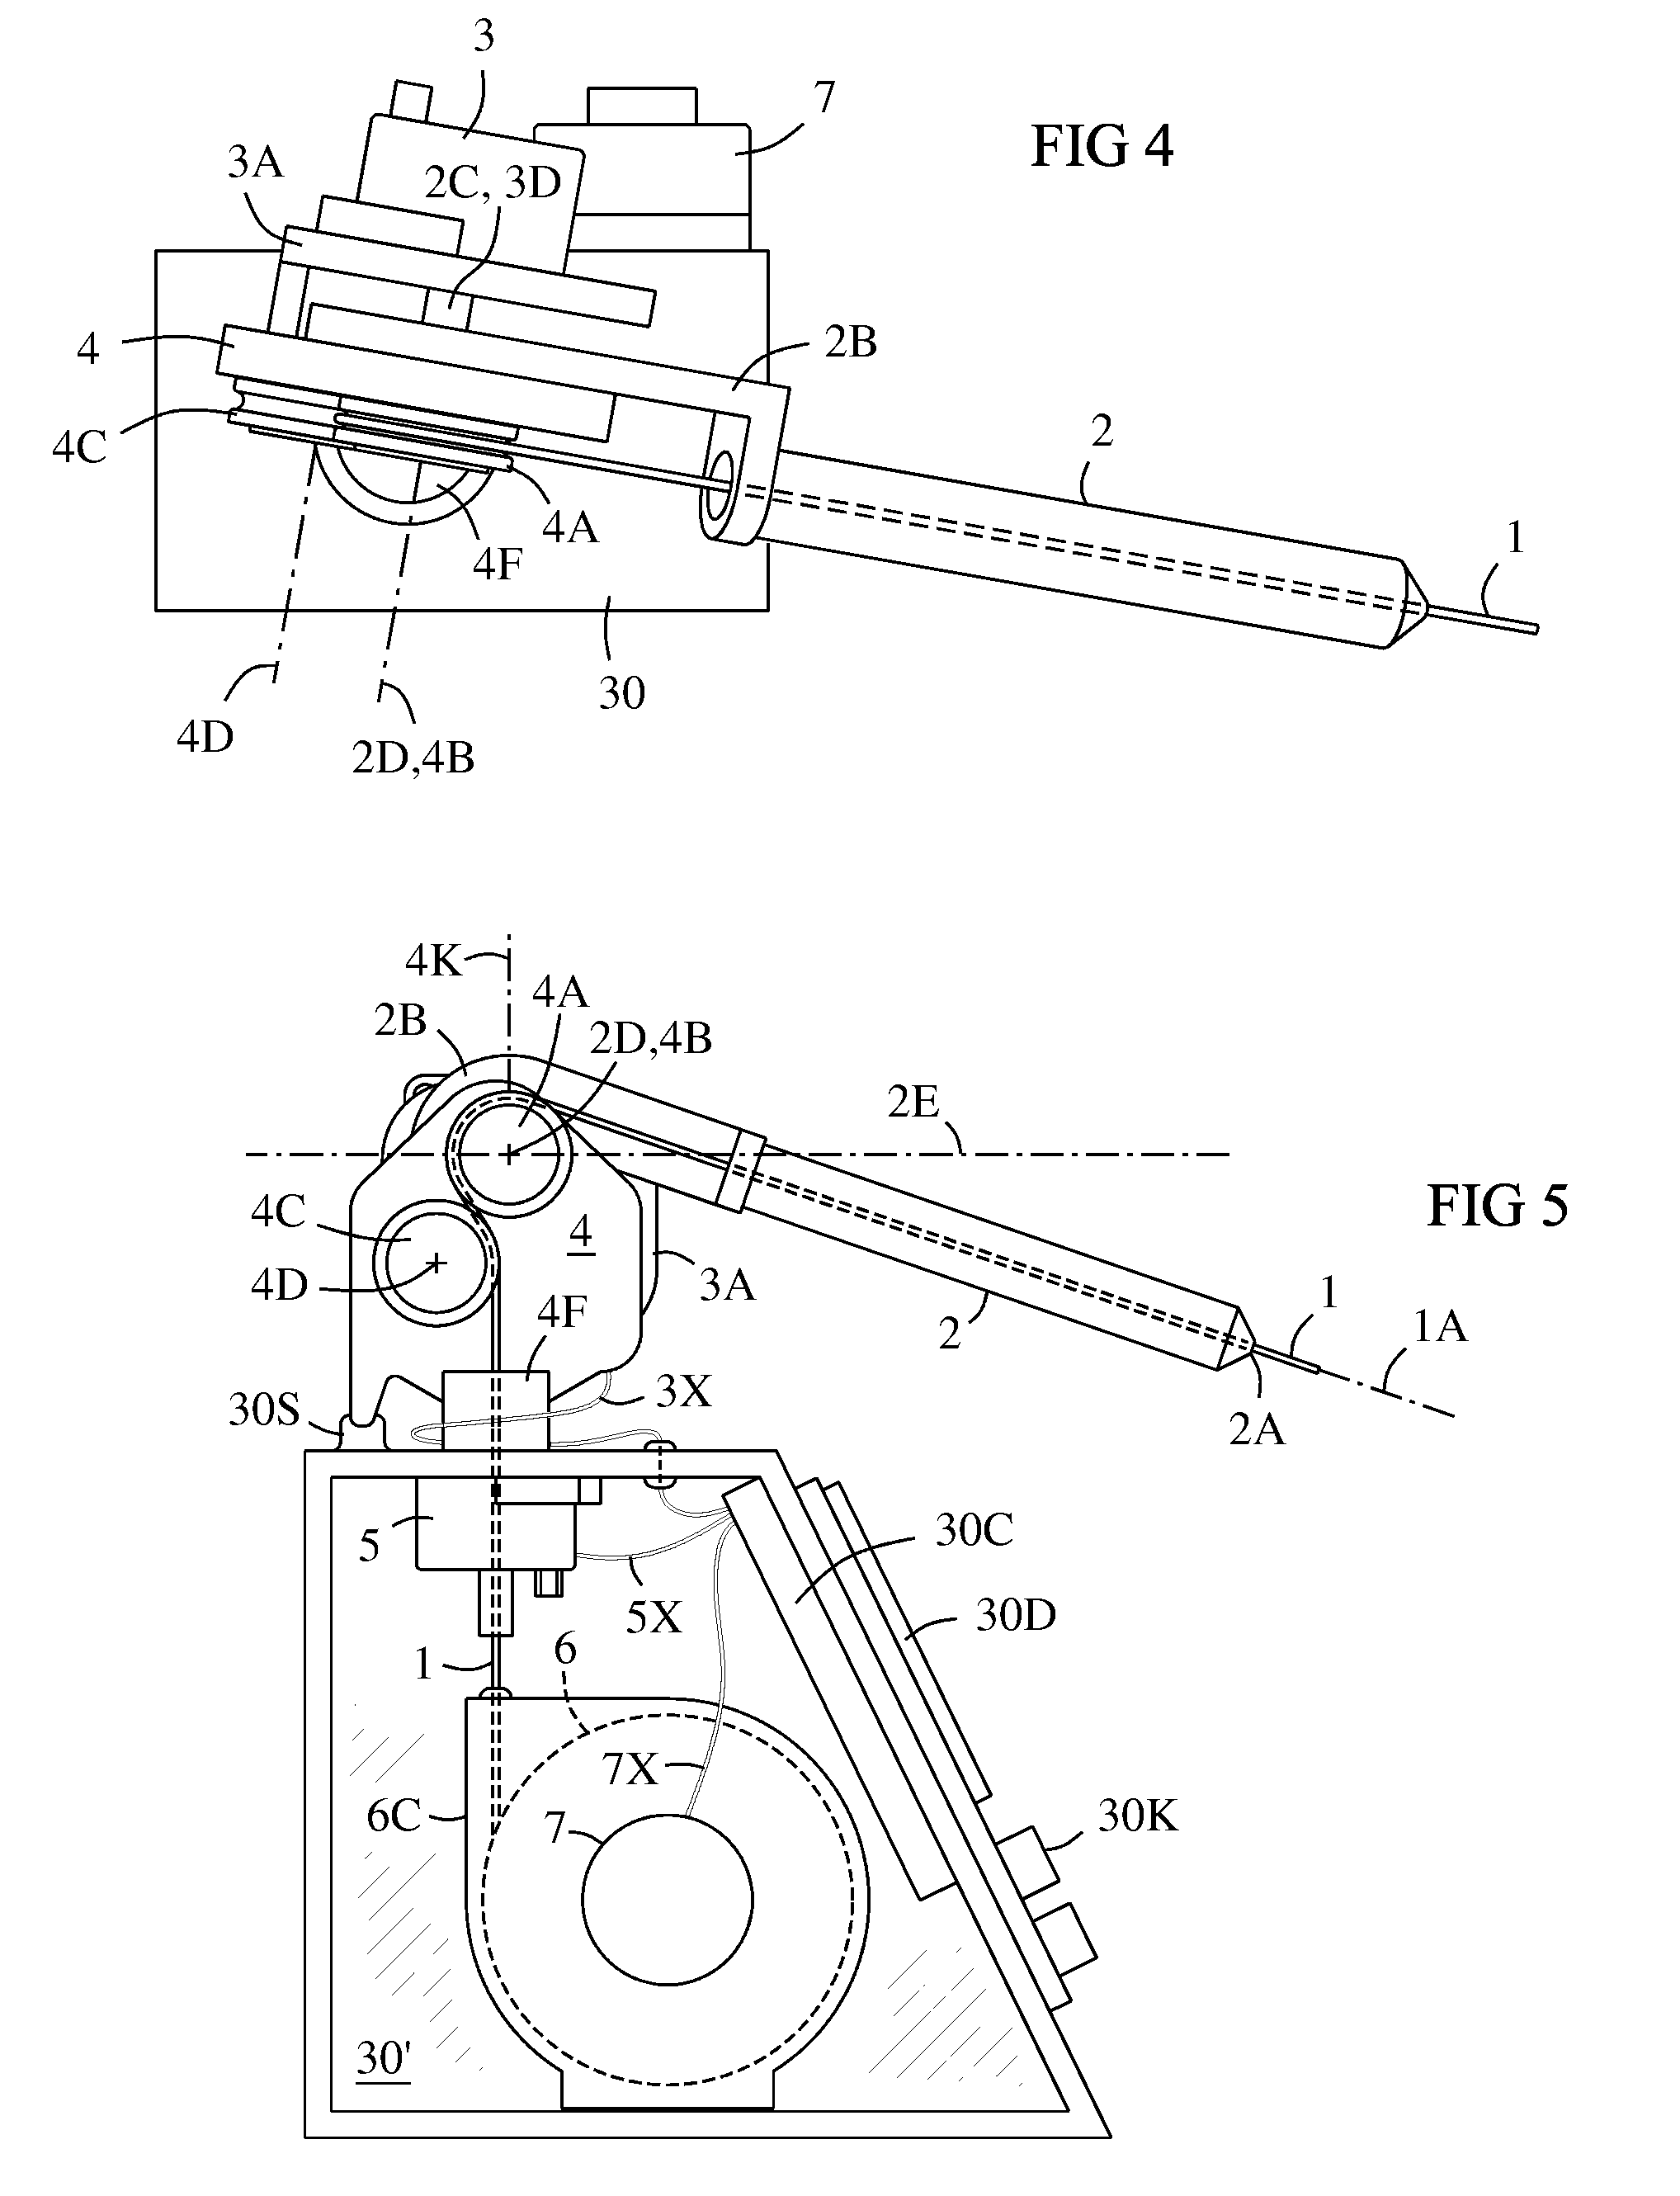 3-dimensional cable guide and cable based position transducer